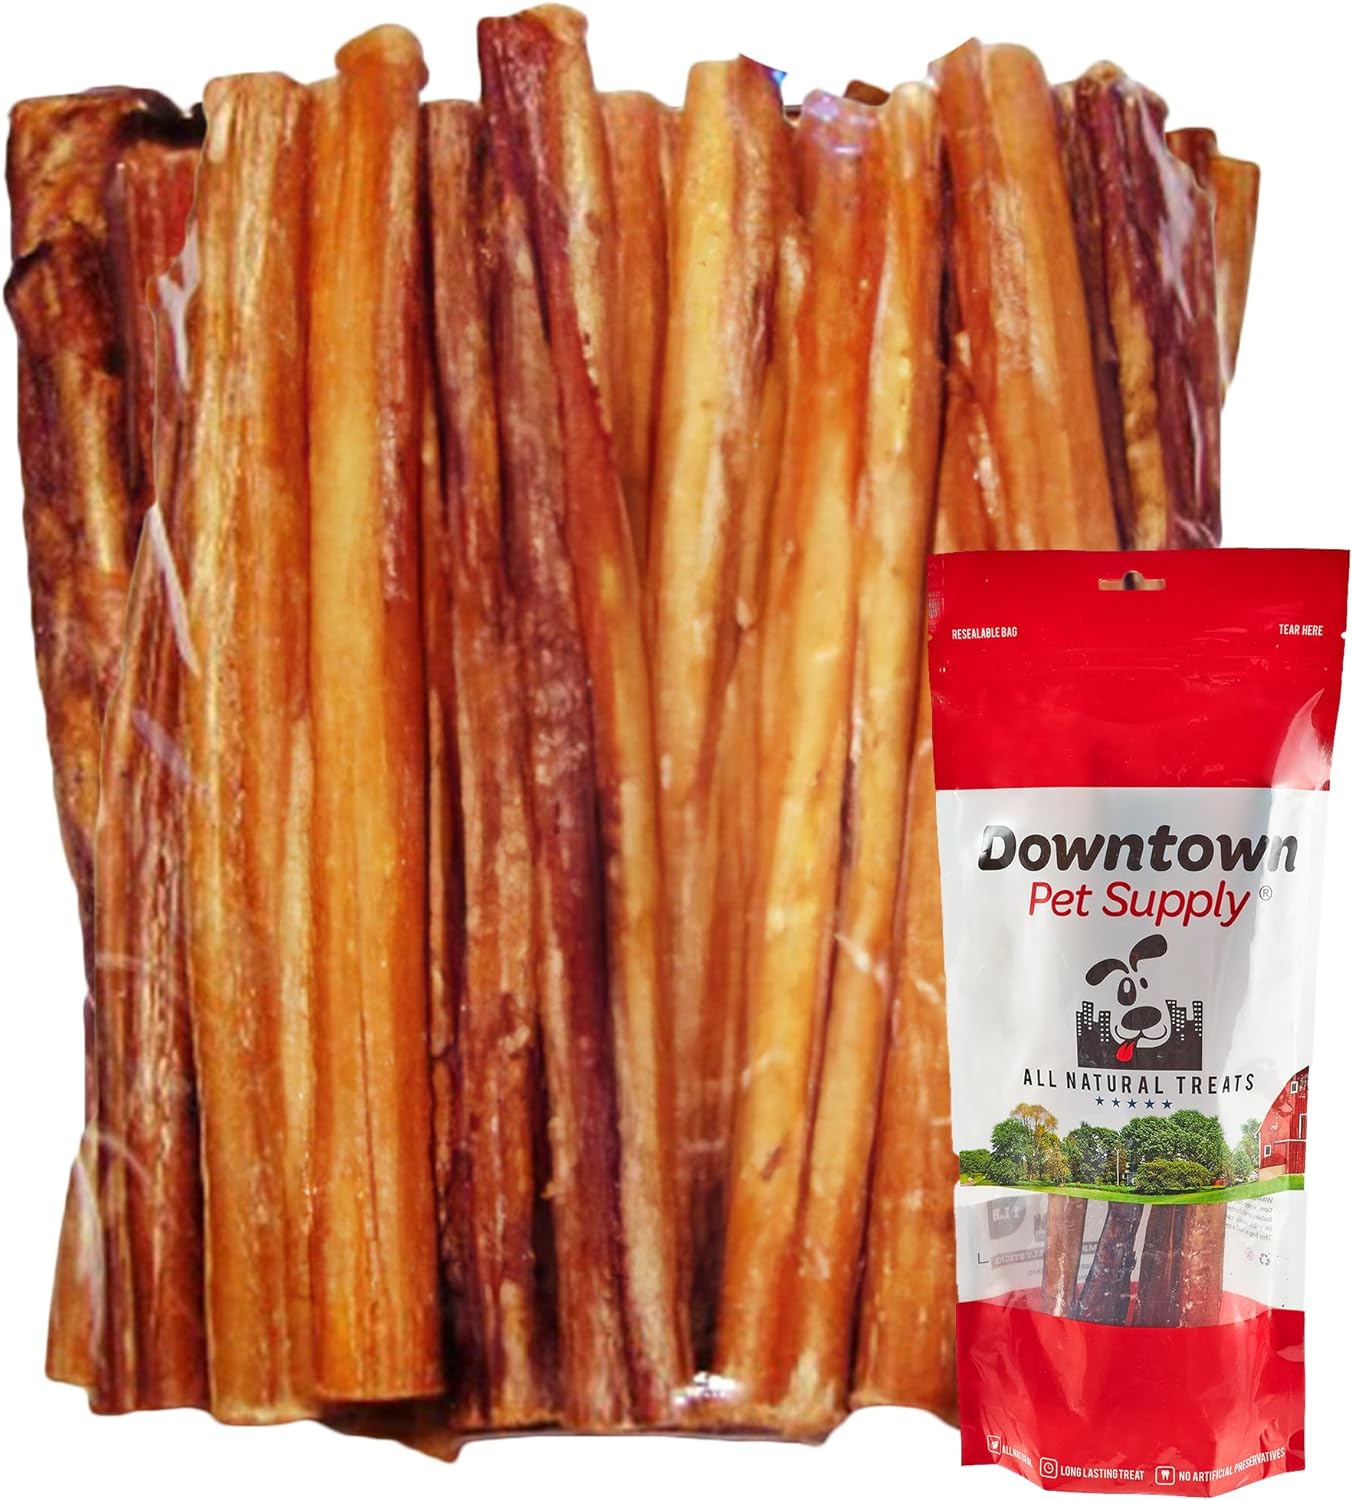 Downtown Pet Supply 12-inch Bully Sticks for Large Dogs, Pack of 4 - Single Ingredient, Rawhide Free Dog Chews for Aggressive Chewers - Nutrient-Rich and Odor Free Bully Sticks for Dogs - Beef